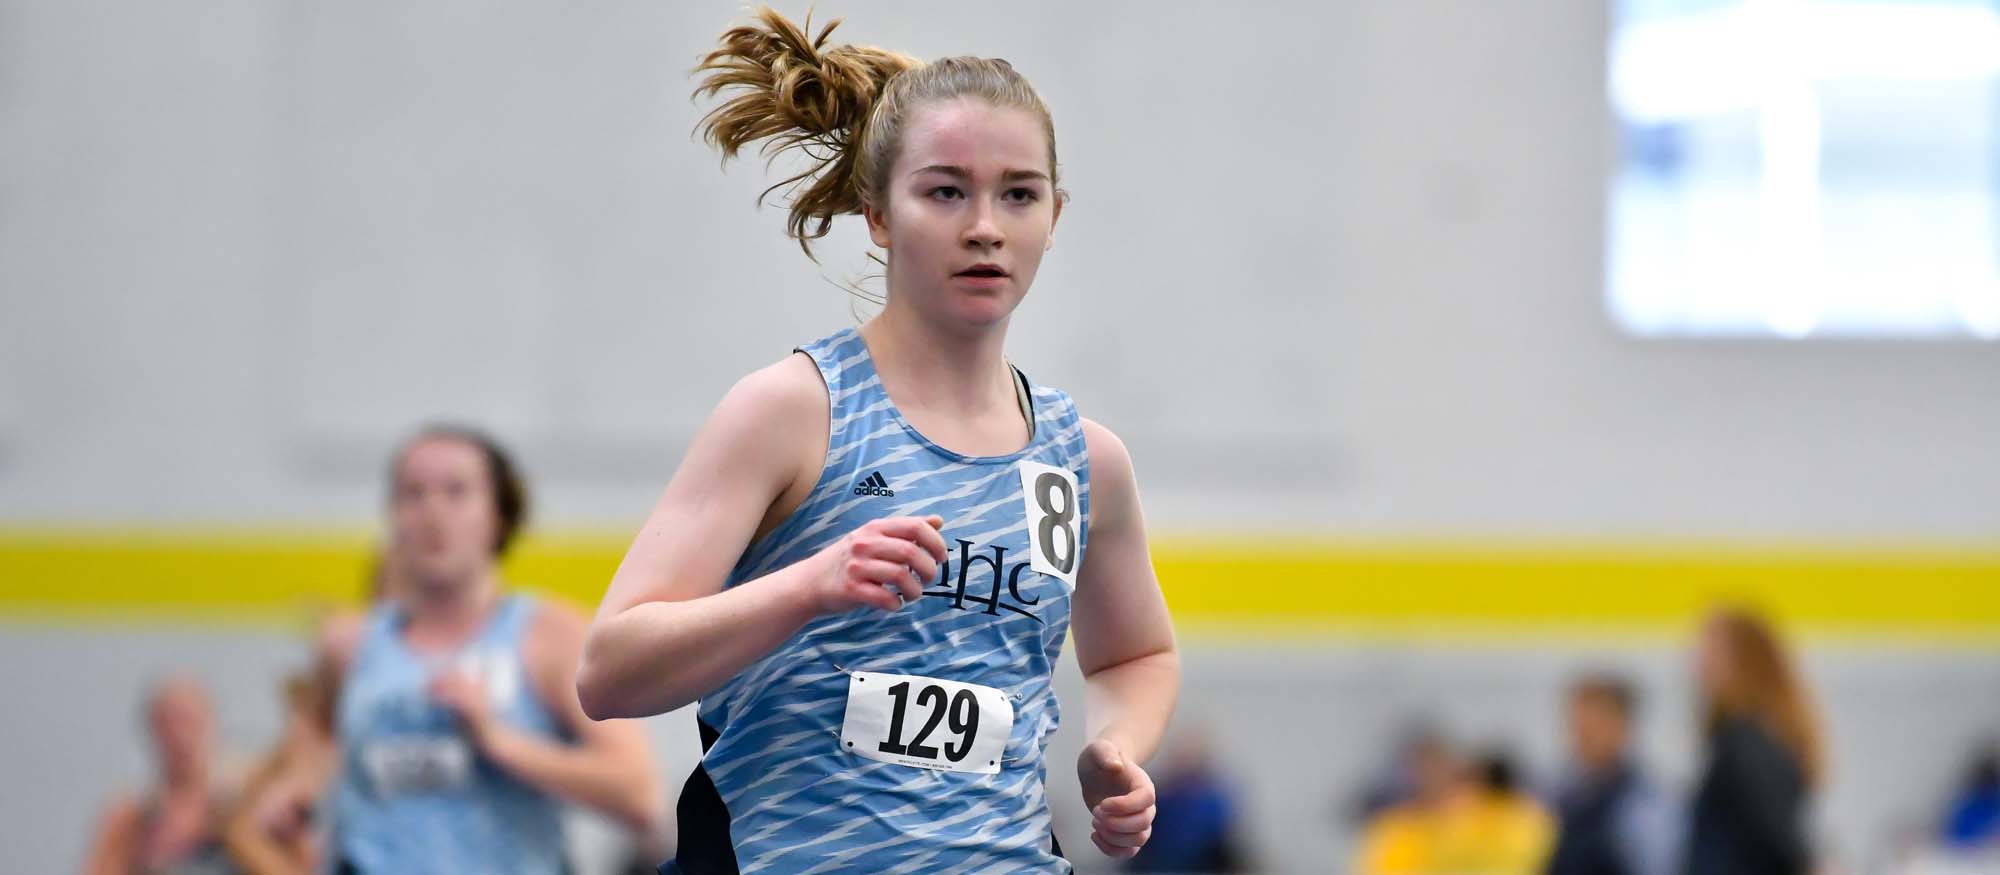 Track and Field Brings Strong Performances to Division III New England Championships